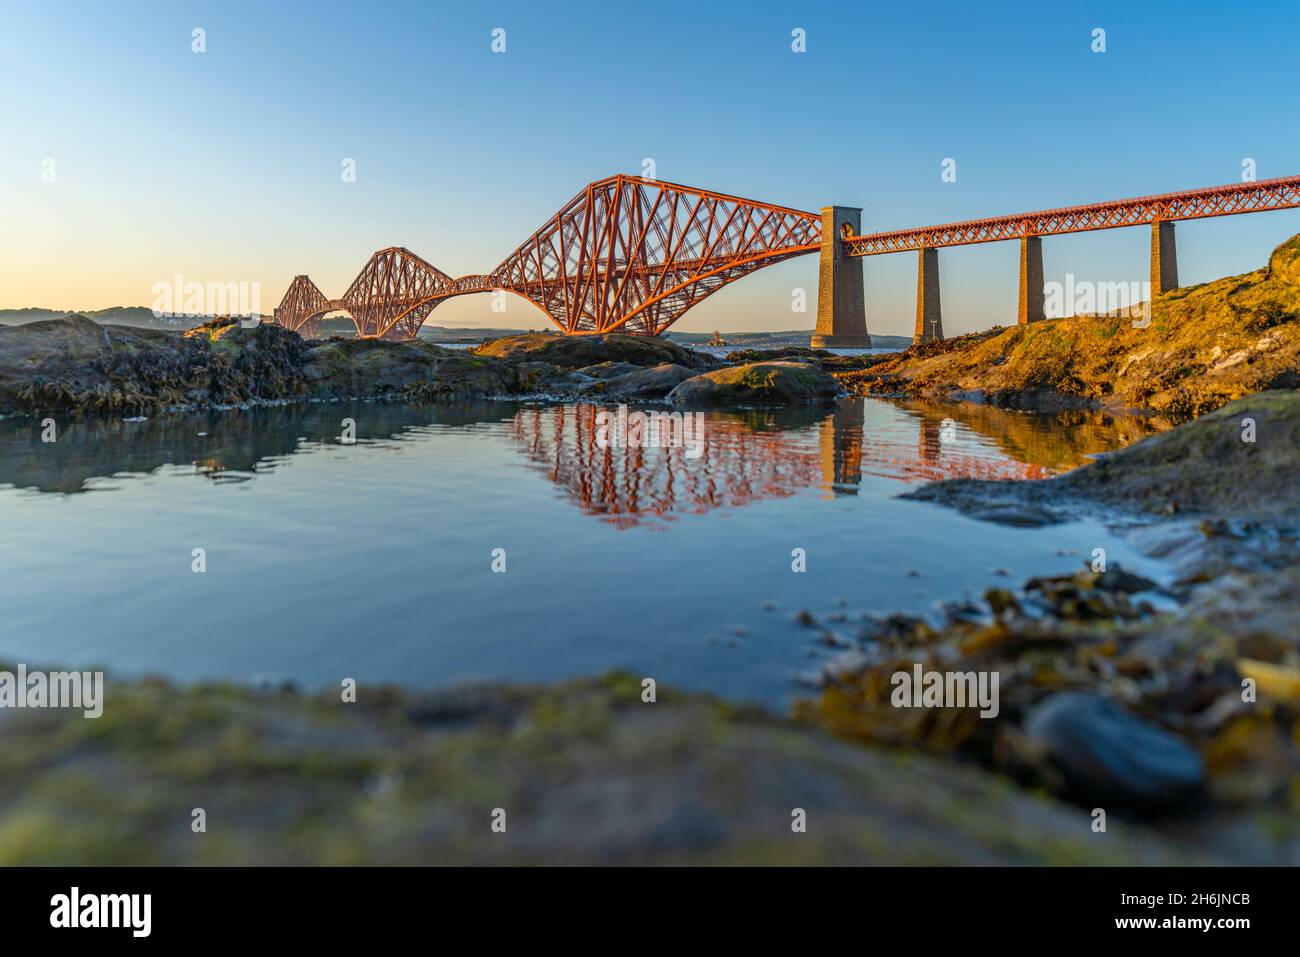 View of the Forth Rail Bridge, UNESCO World Heritage Site, over the Firth of Forth, South Queensferry, Edinburgh, Lothian, Scotland, United Kingdom Stock Photo